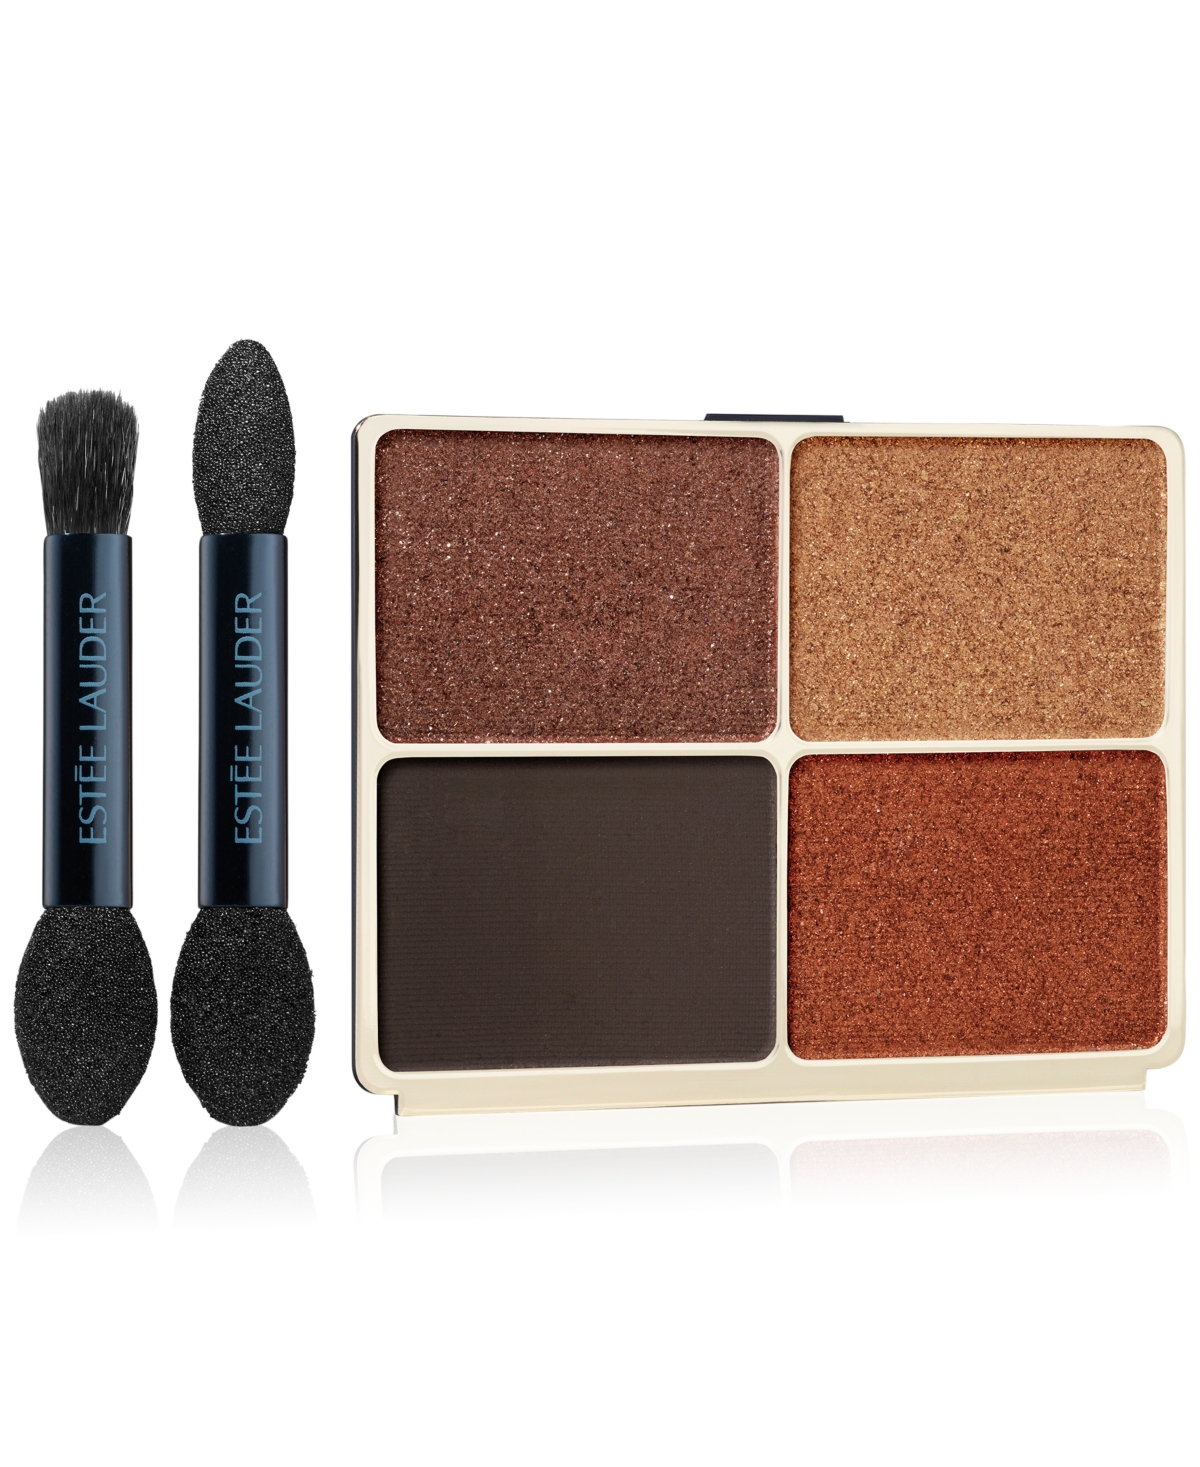 Pure Color Envy Luxe EyeShadow Quad Refill - Wild Earth